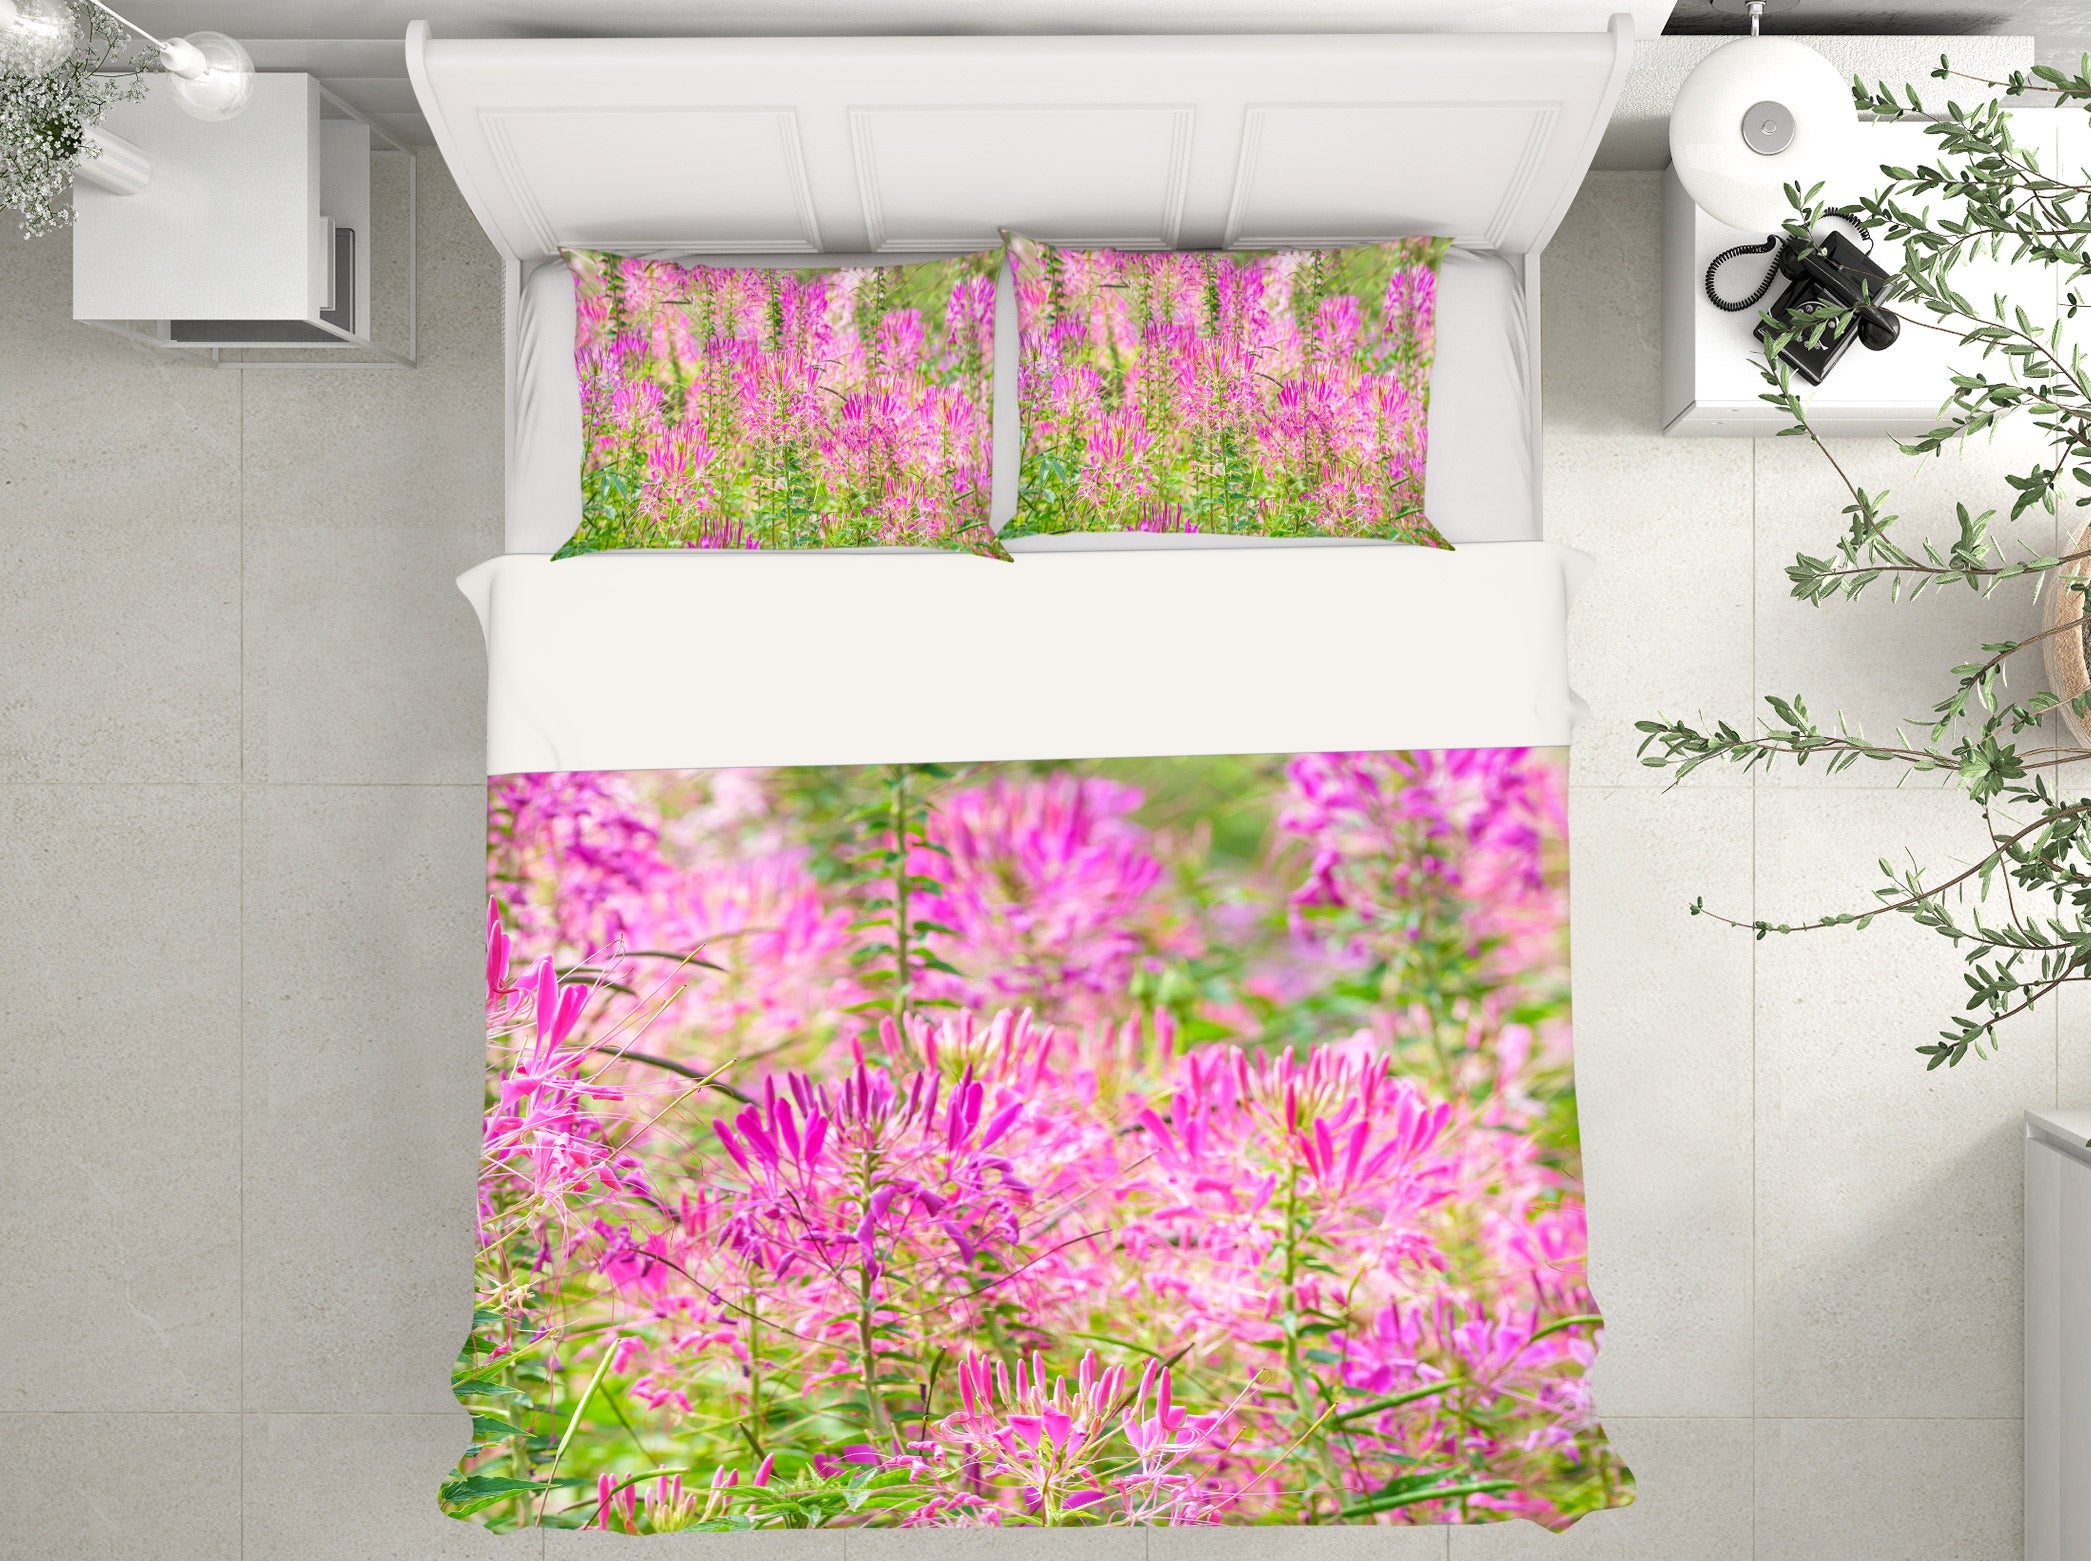 3D Pink Wildflowers 7009 Assaf Frank Bedding Bed Pillowcases Quilt Cover Duvet Cover